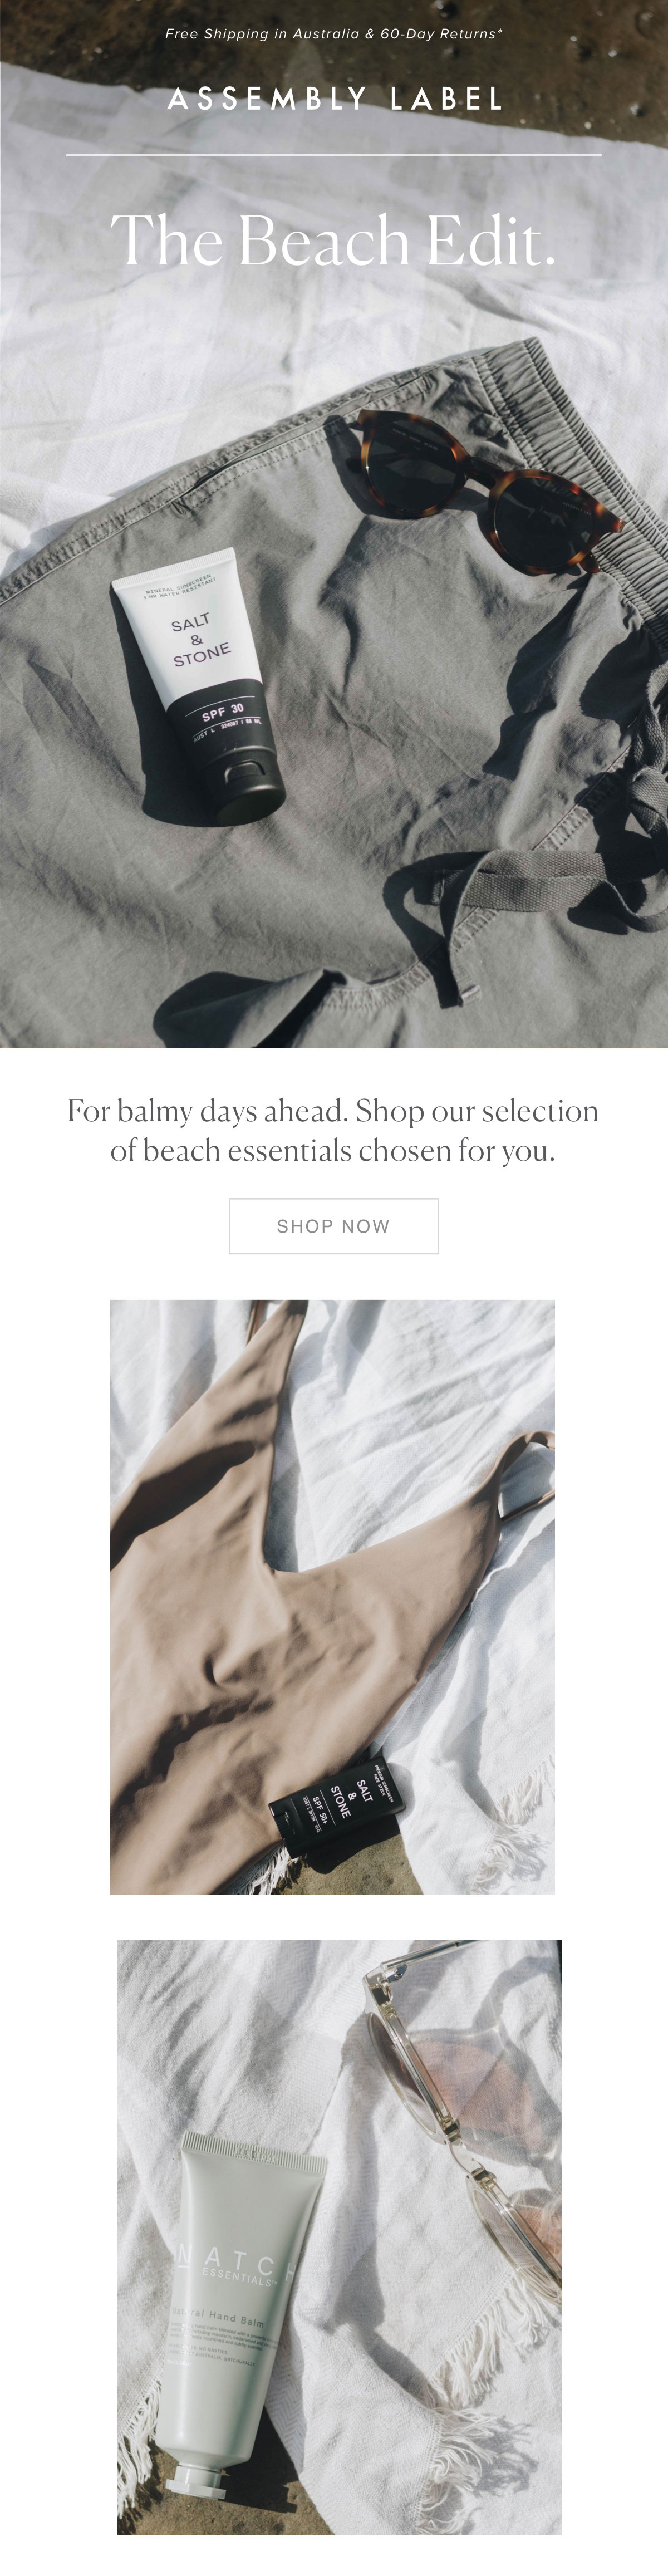 The Beach Edit | Assembly Label